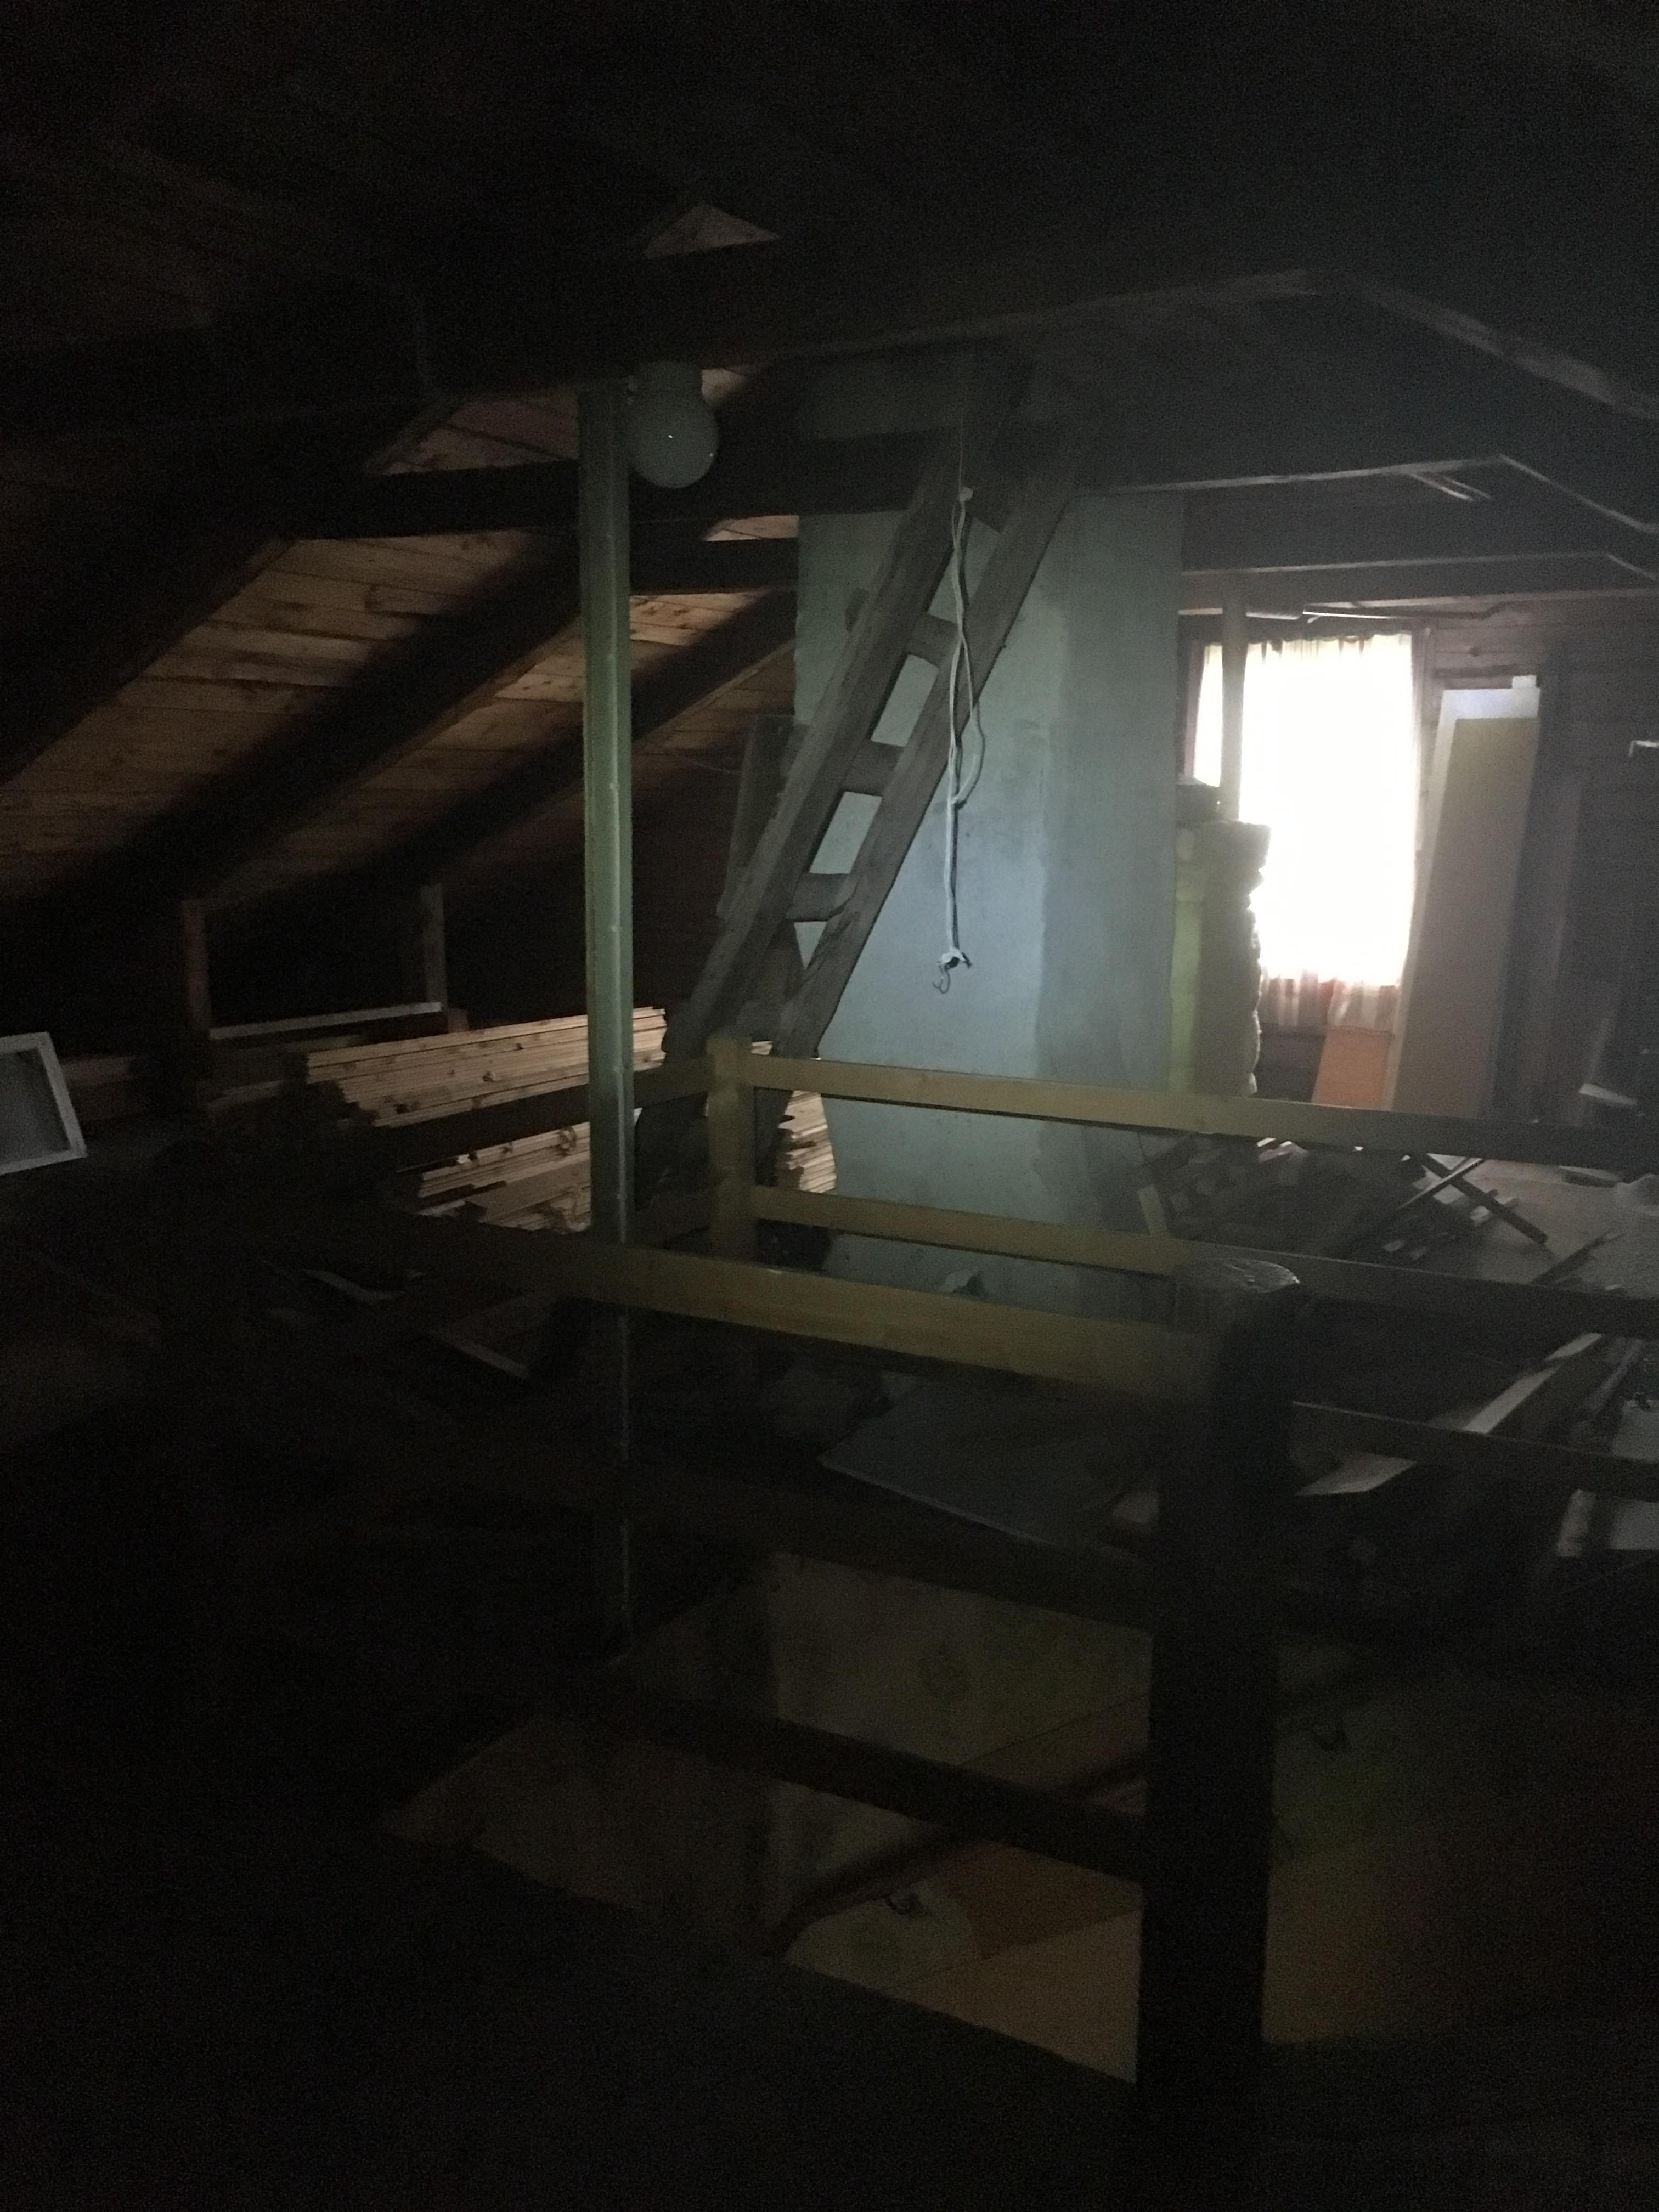 The only empty space (well not full of shit) was the attic; a beautiful large area, and here you can see one of the chimneys cutting through it to the roof.